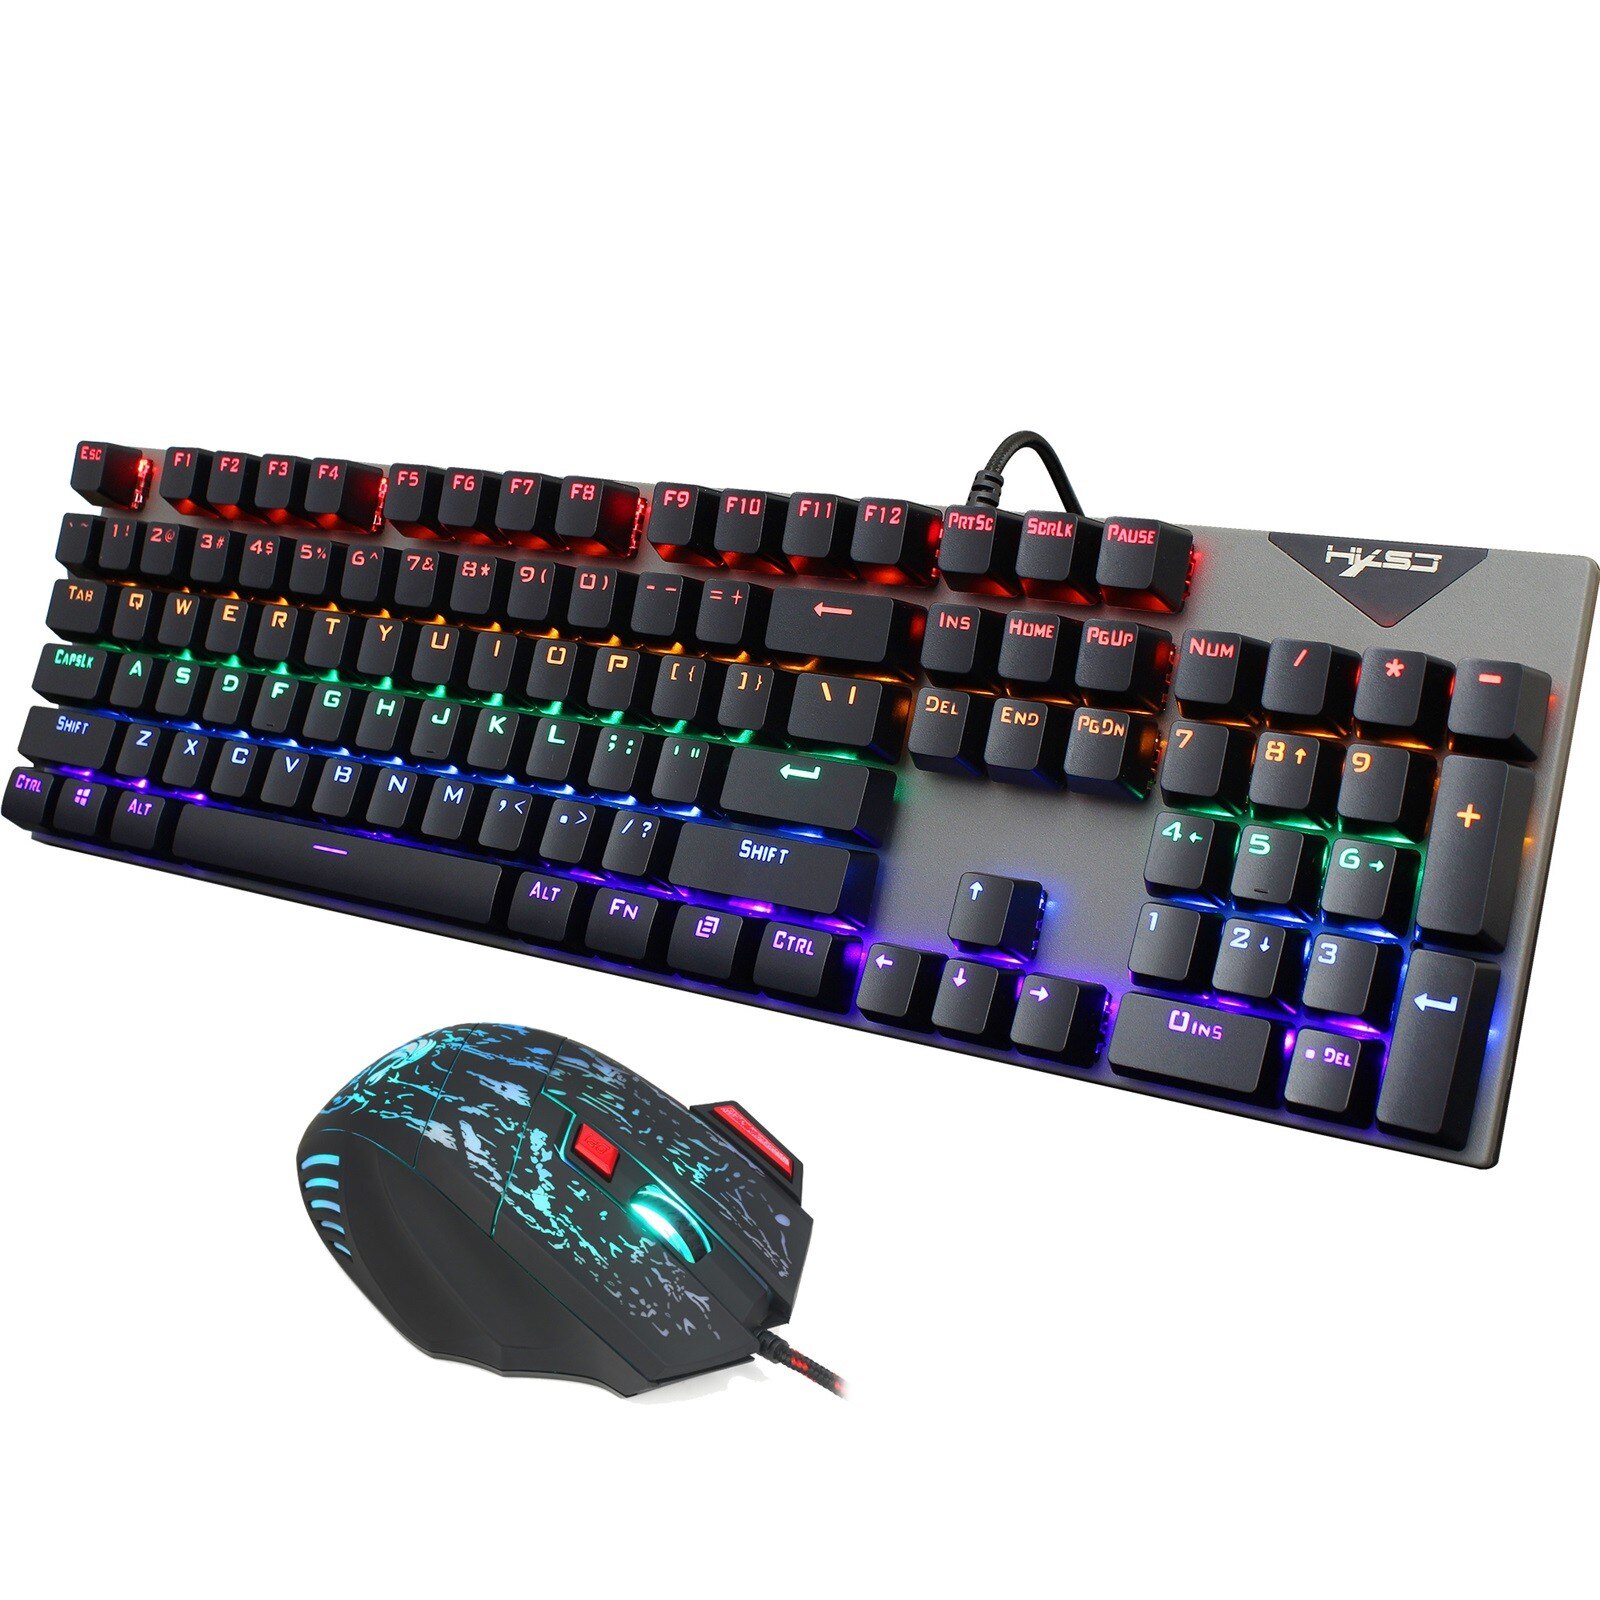 Rgb Mechanische Gaming Toetsenbord Computer Muis Gamer Set 104key Pckeypad 5500Dpi 7Key Wired Gaming Mouse Voor Pc Laptop Клавиатура